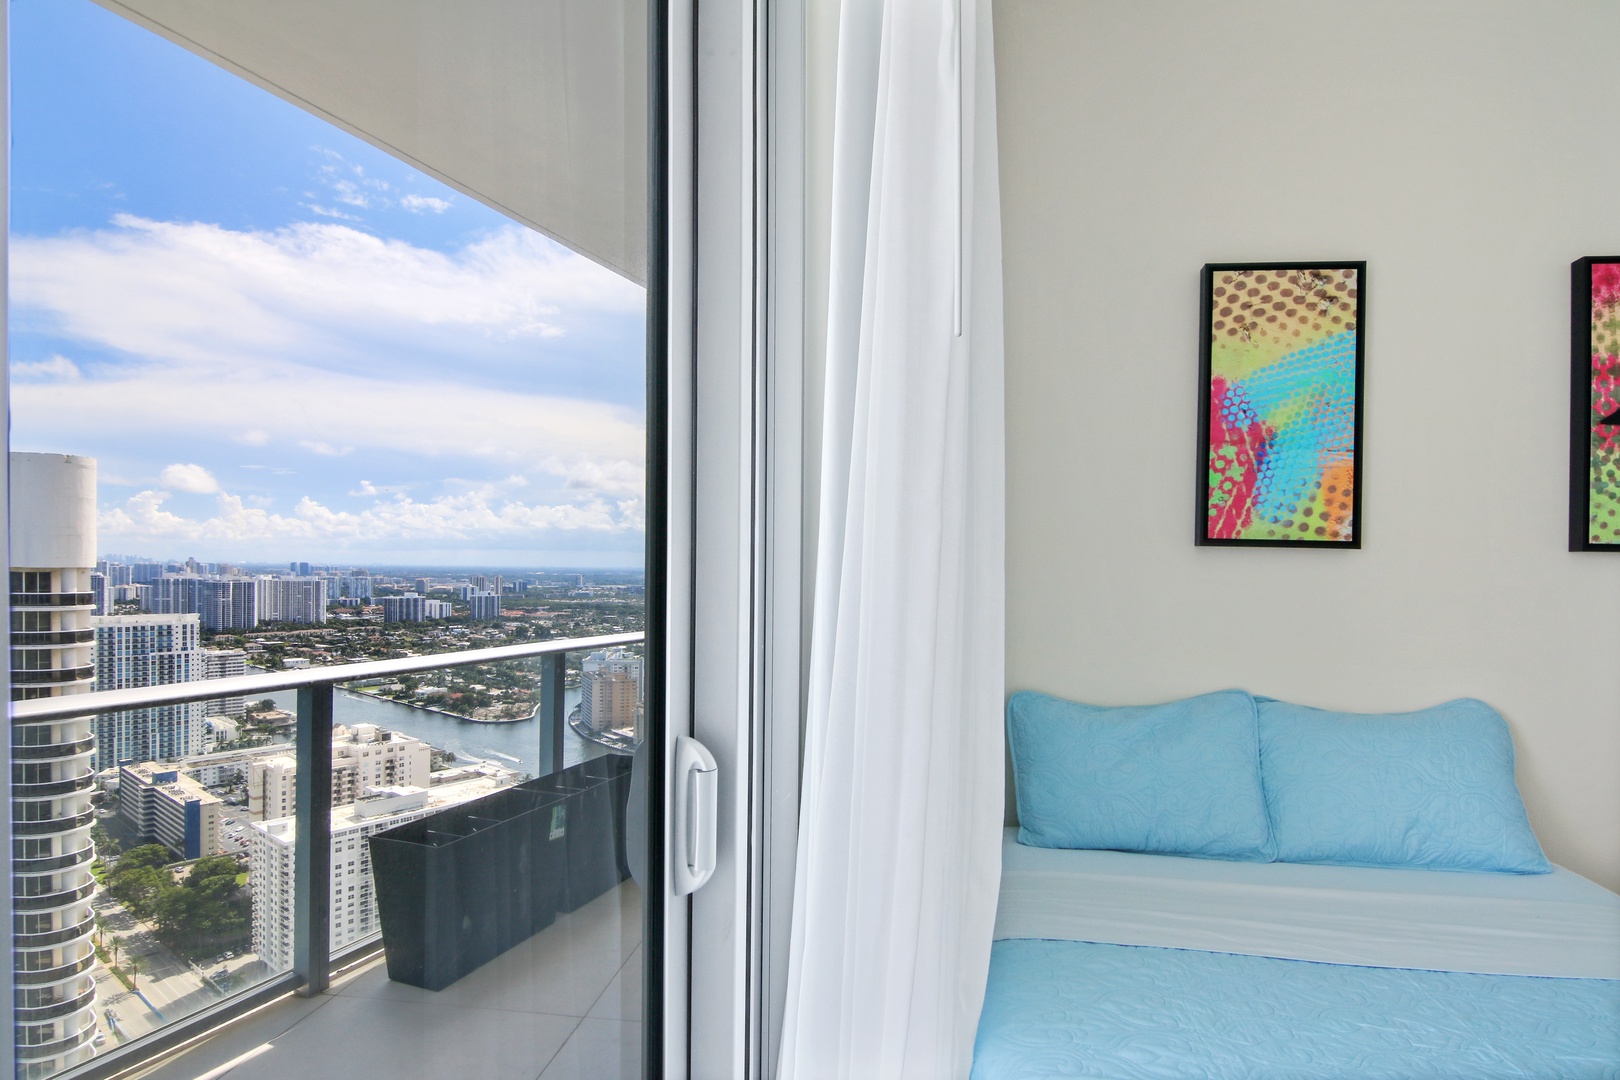 The 1st of 2 double queen bedrooms offers a Smart TV, desk, & balcony access